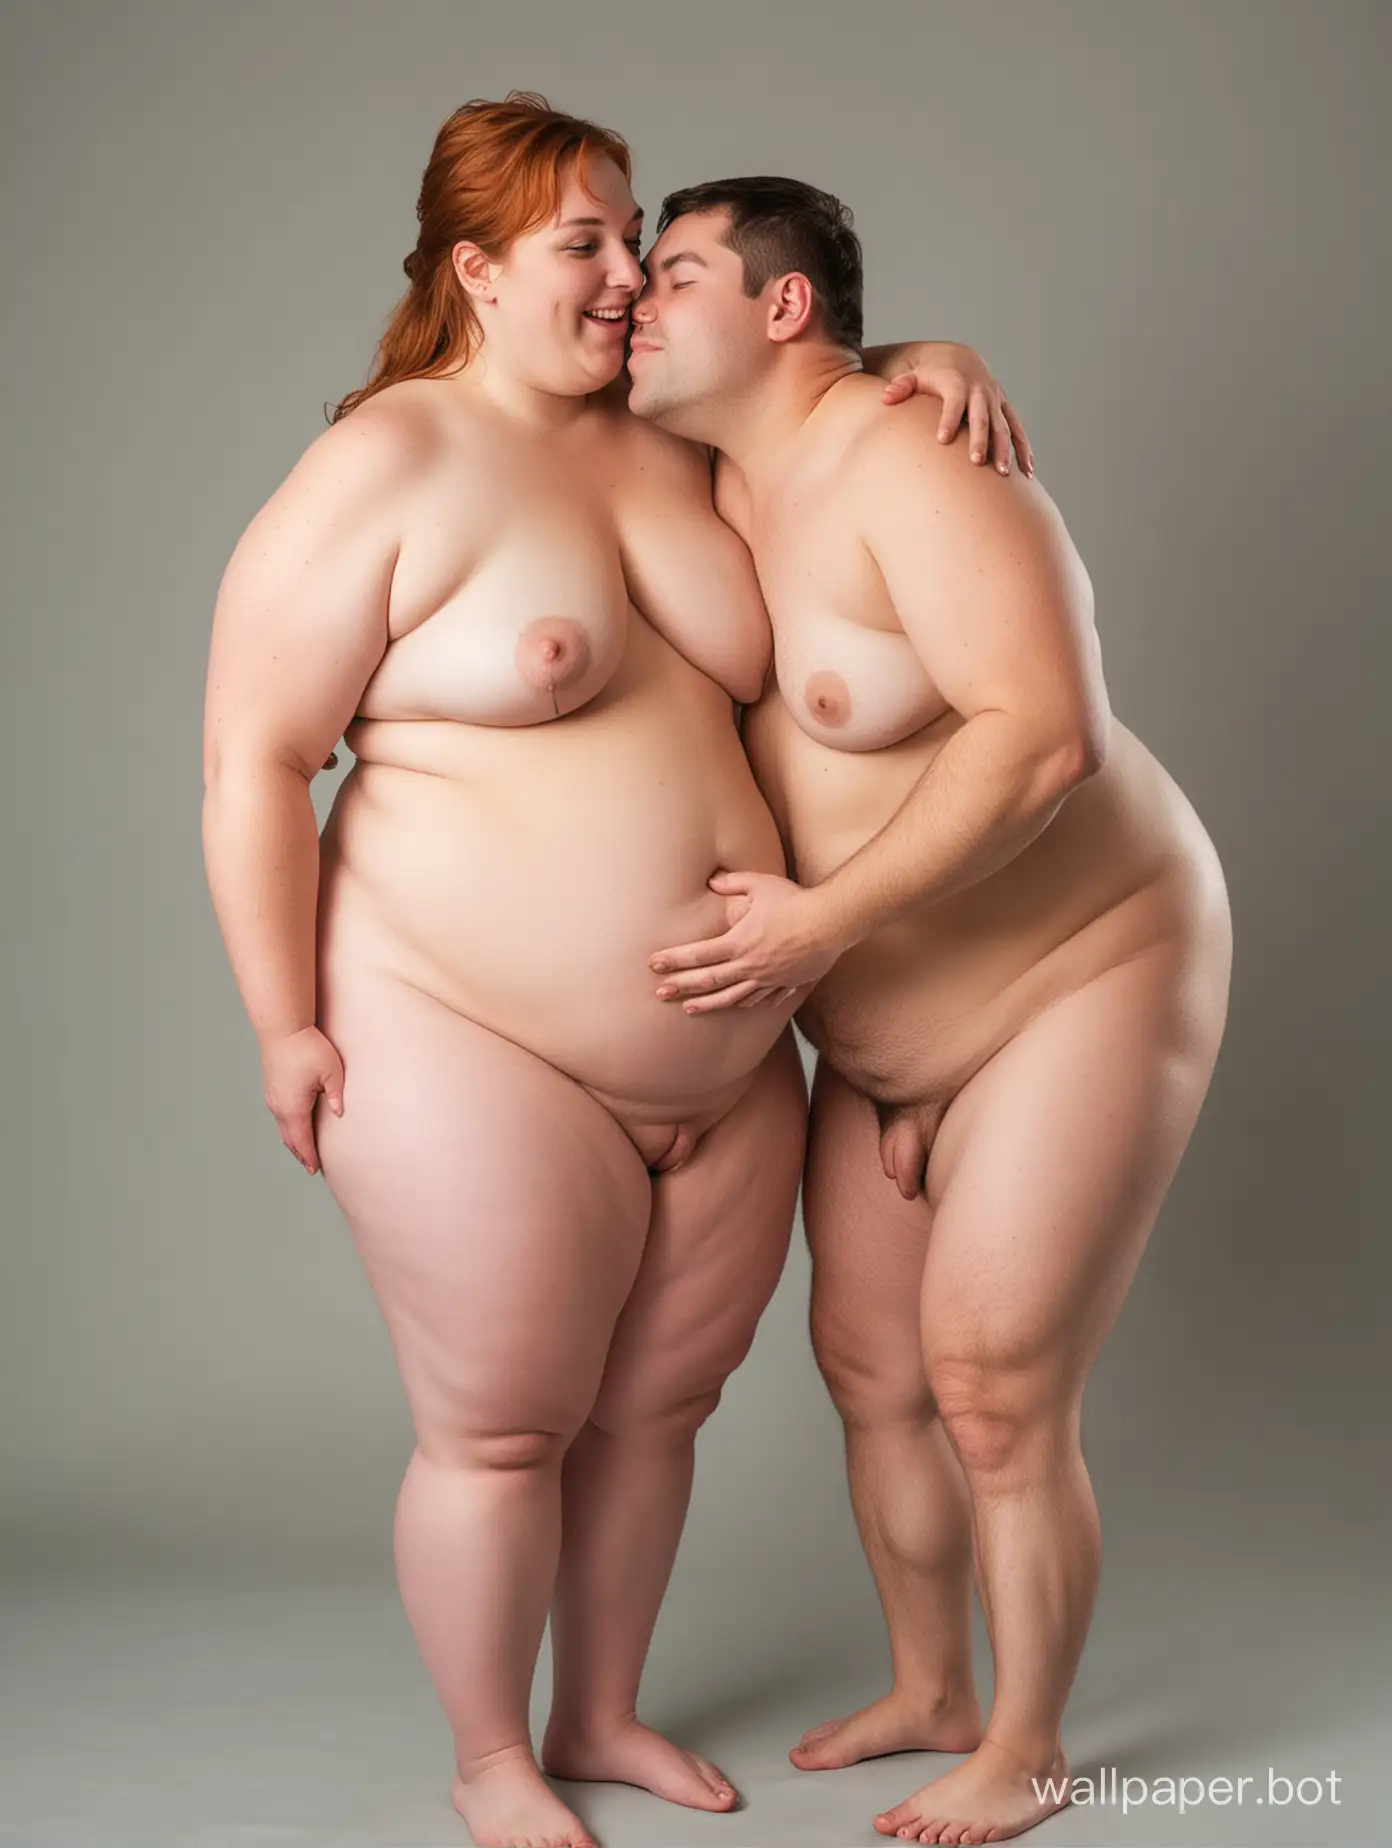 Fat woman and naked man embraced